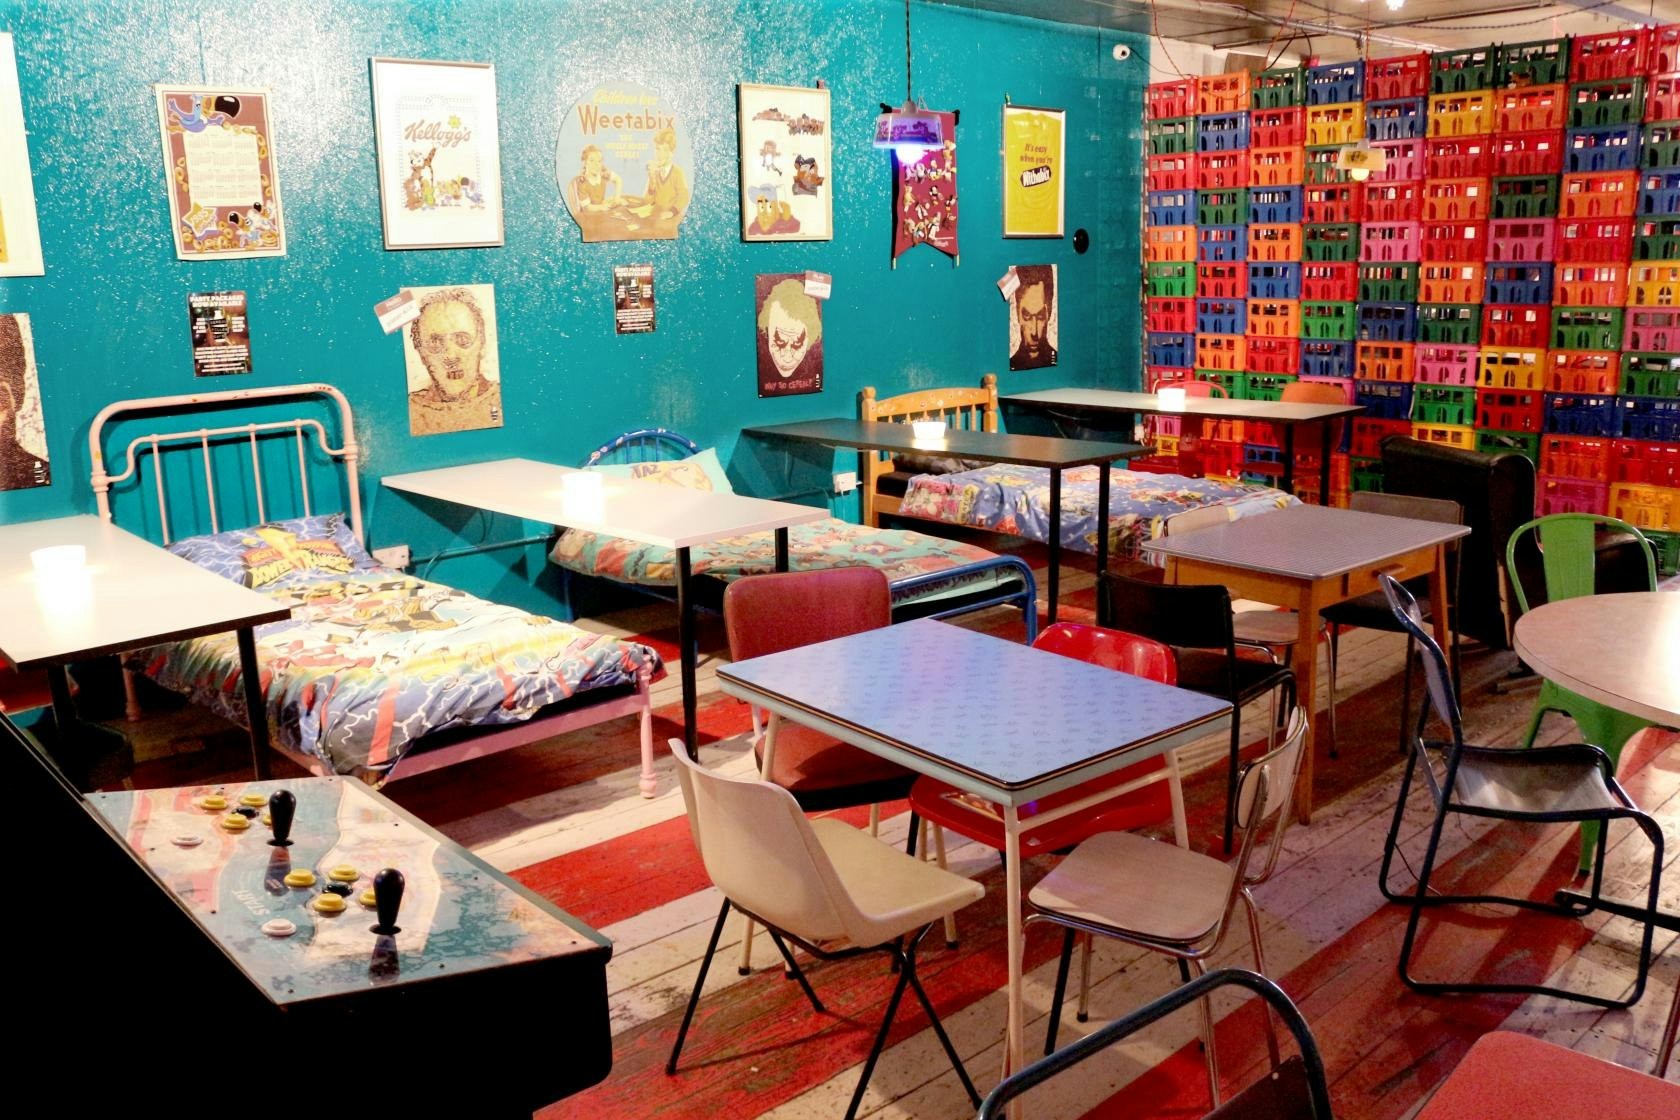 Toddler Party Venues in London - Cereal Killer Cafe